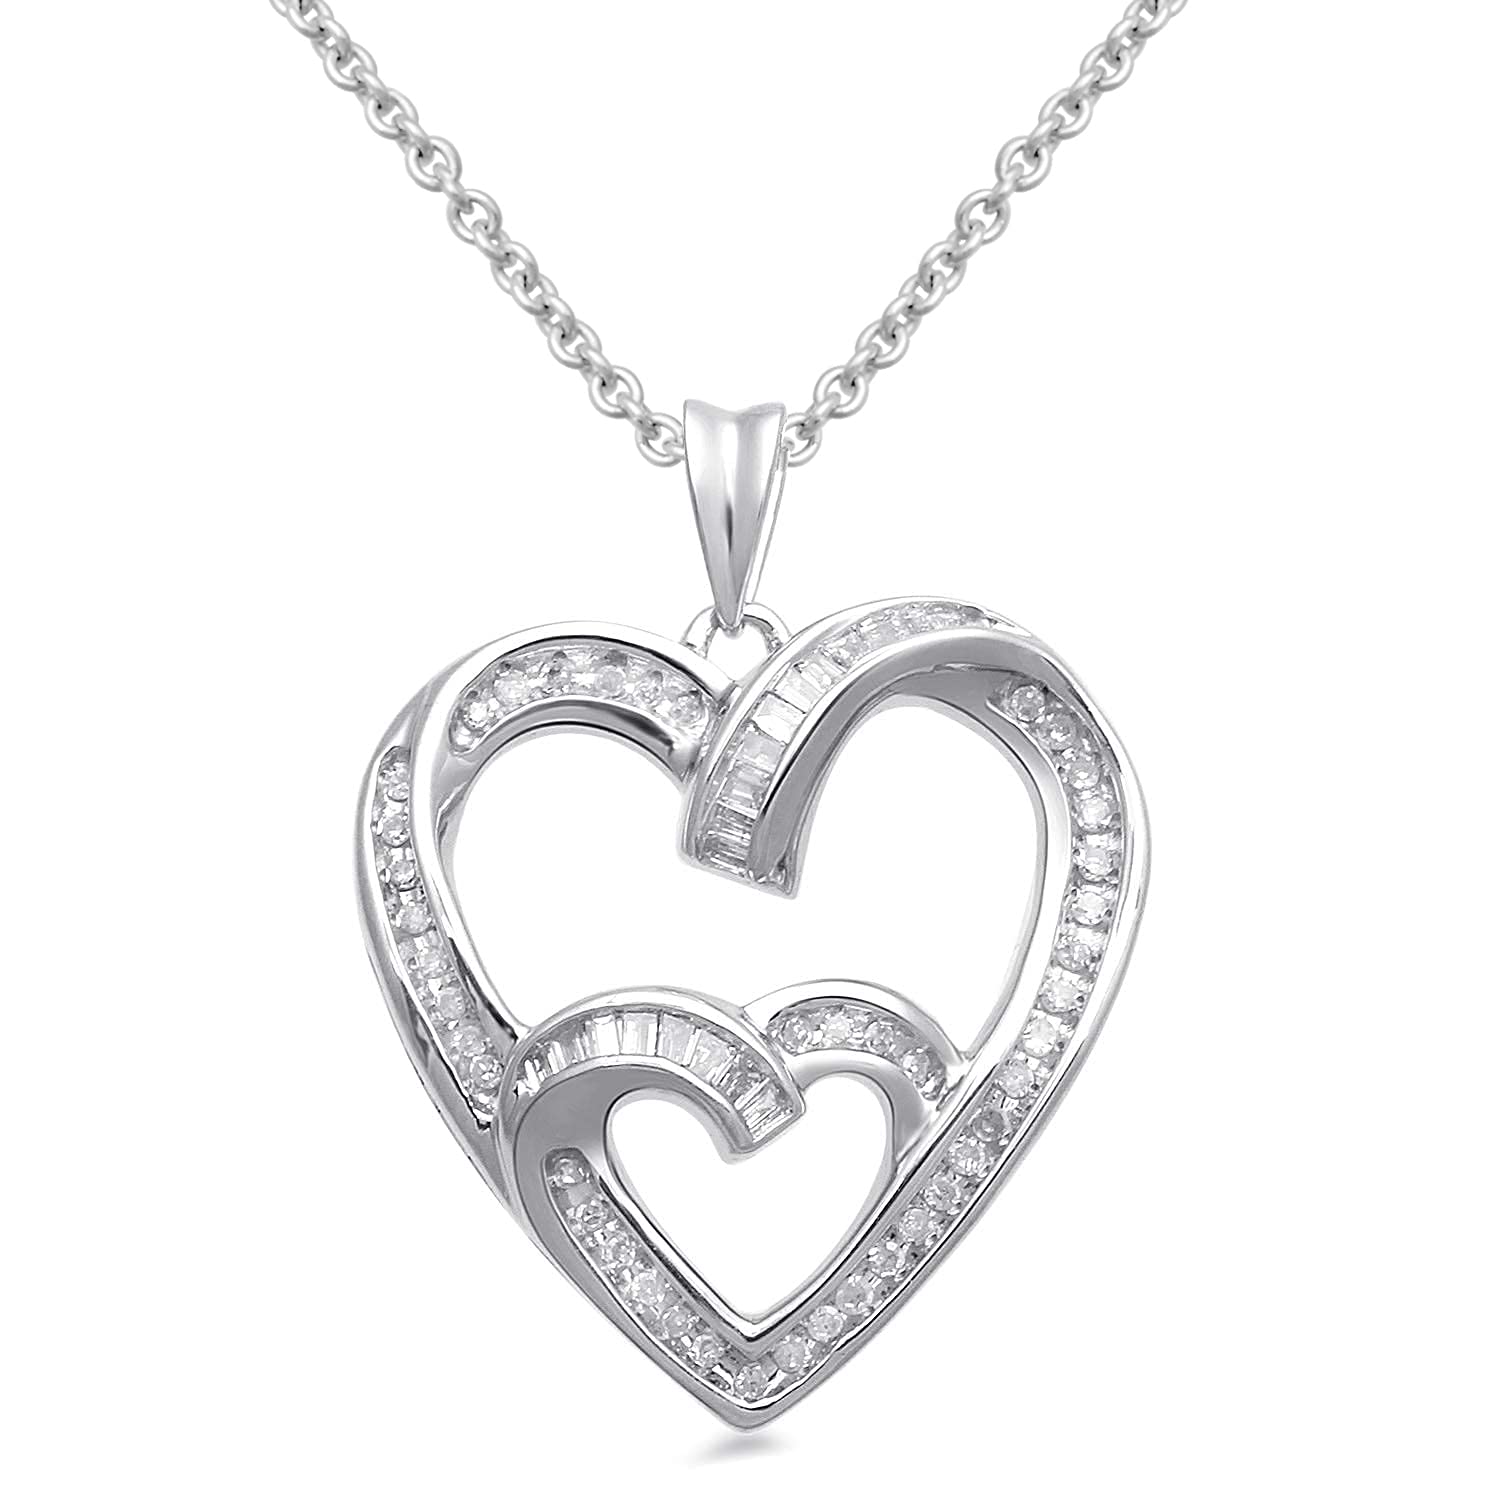 Jewelili Diamond Necklace Heart Jewelry in Yellow Gold Over